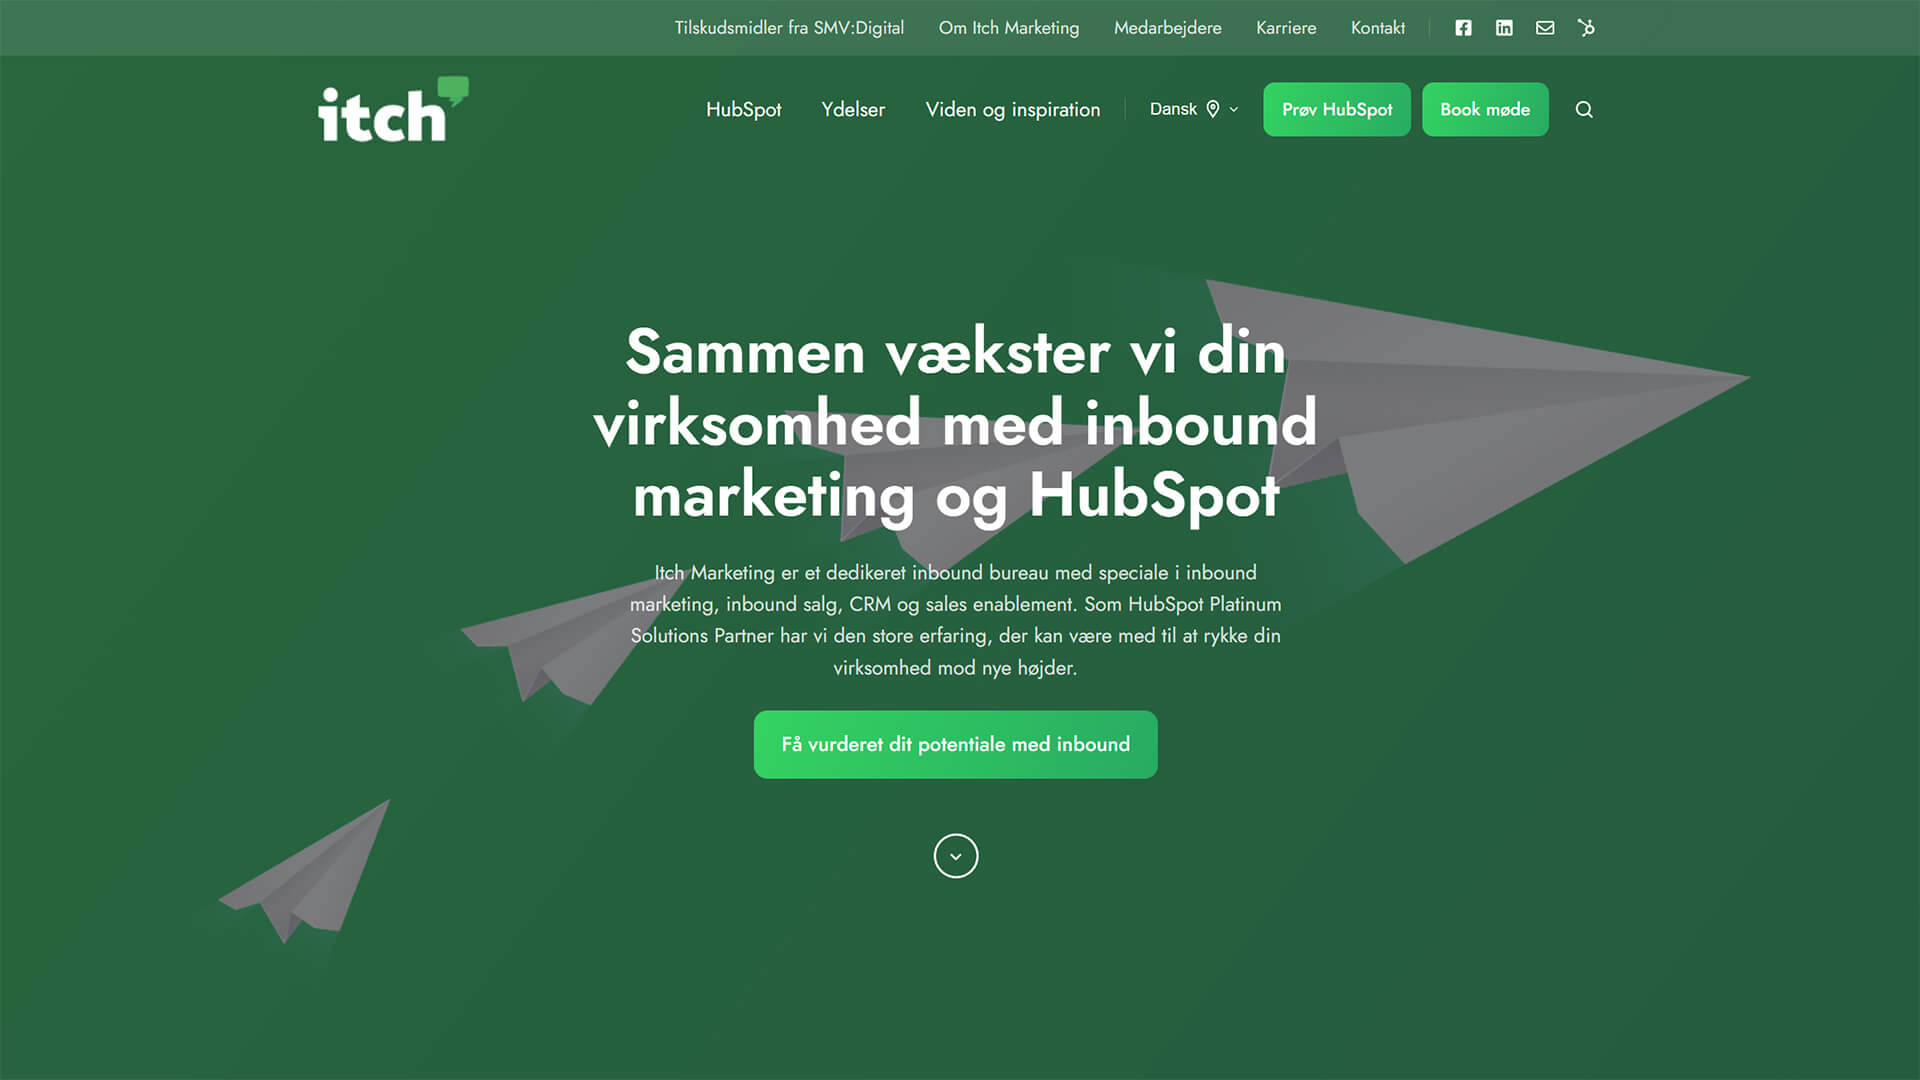 The beautiful itchmarketing.dk website created with Act3 on the HubSpot CMS